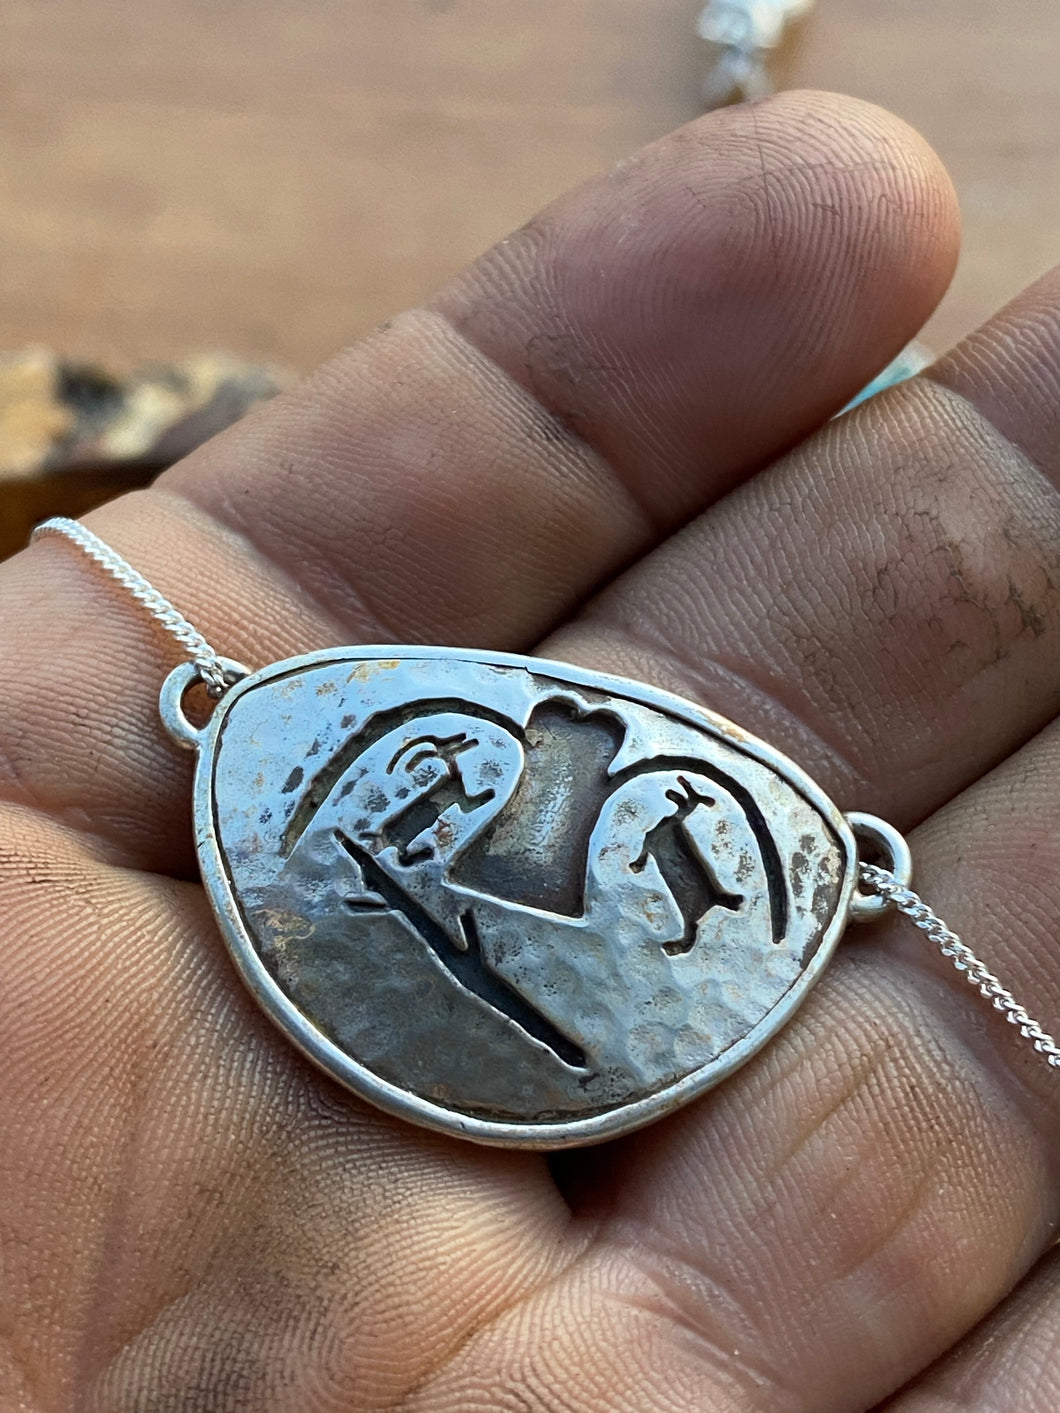 Protector pictograph pendant